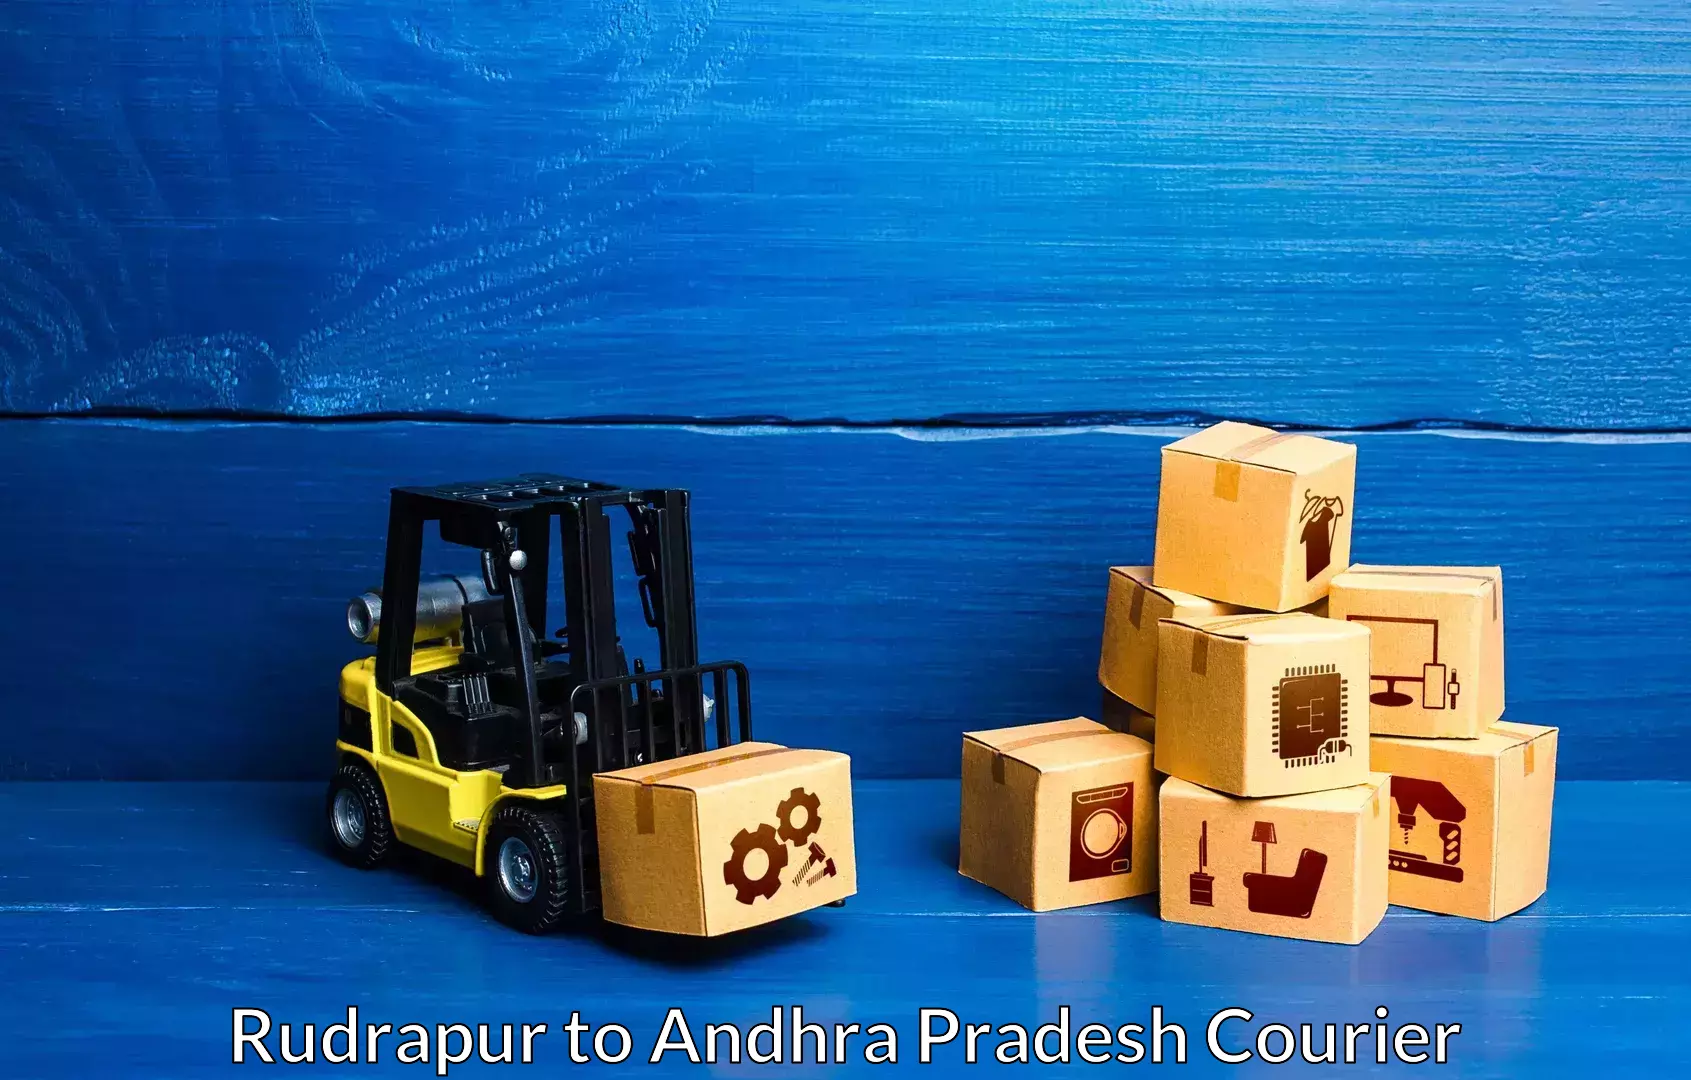 Full-service movers Rudrapur to Visakhapatnam Port